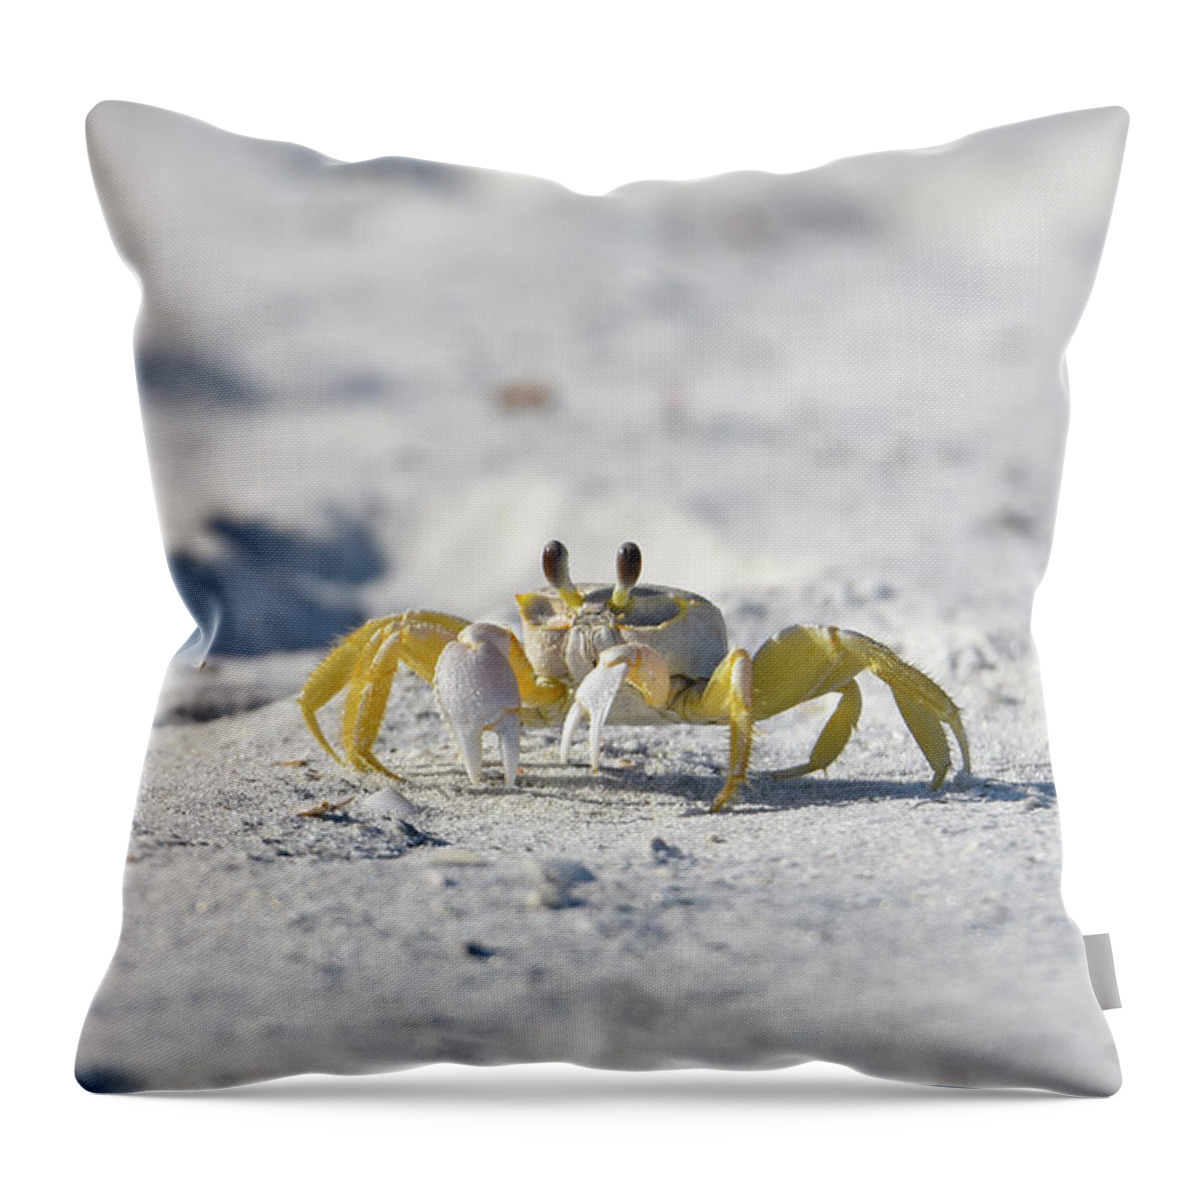 Crab Throw Pillow featuring the photograph Yellow Crab by Artful Imagery